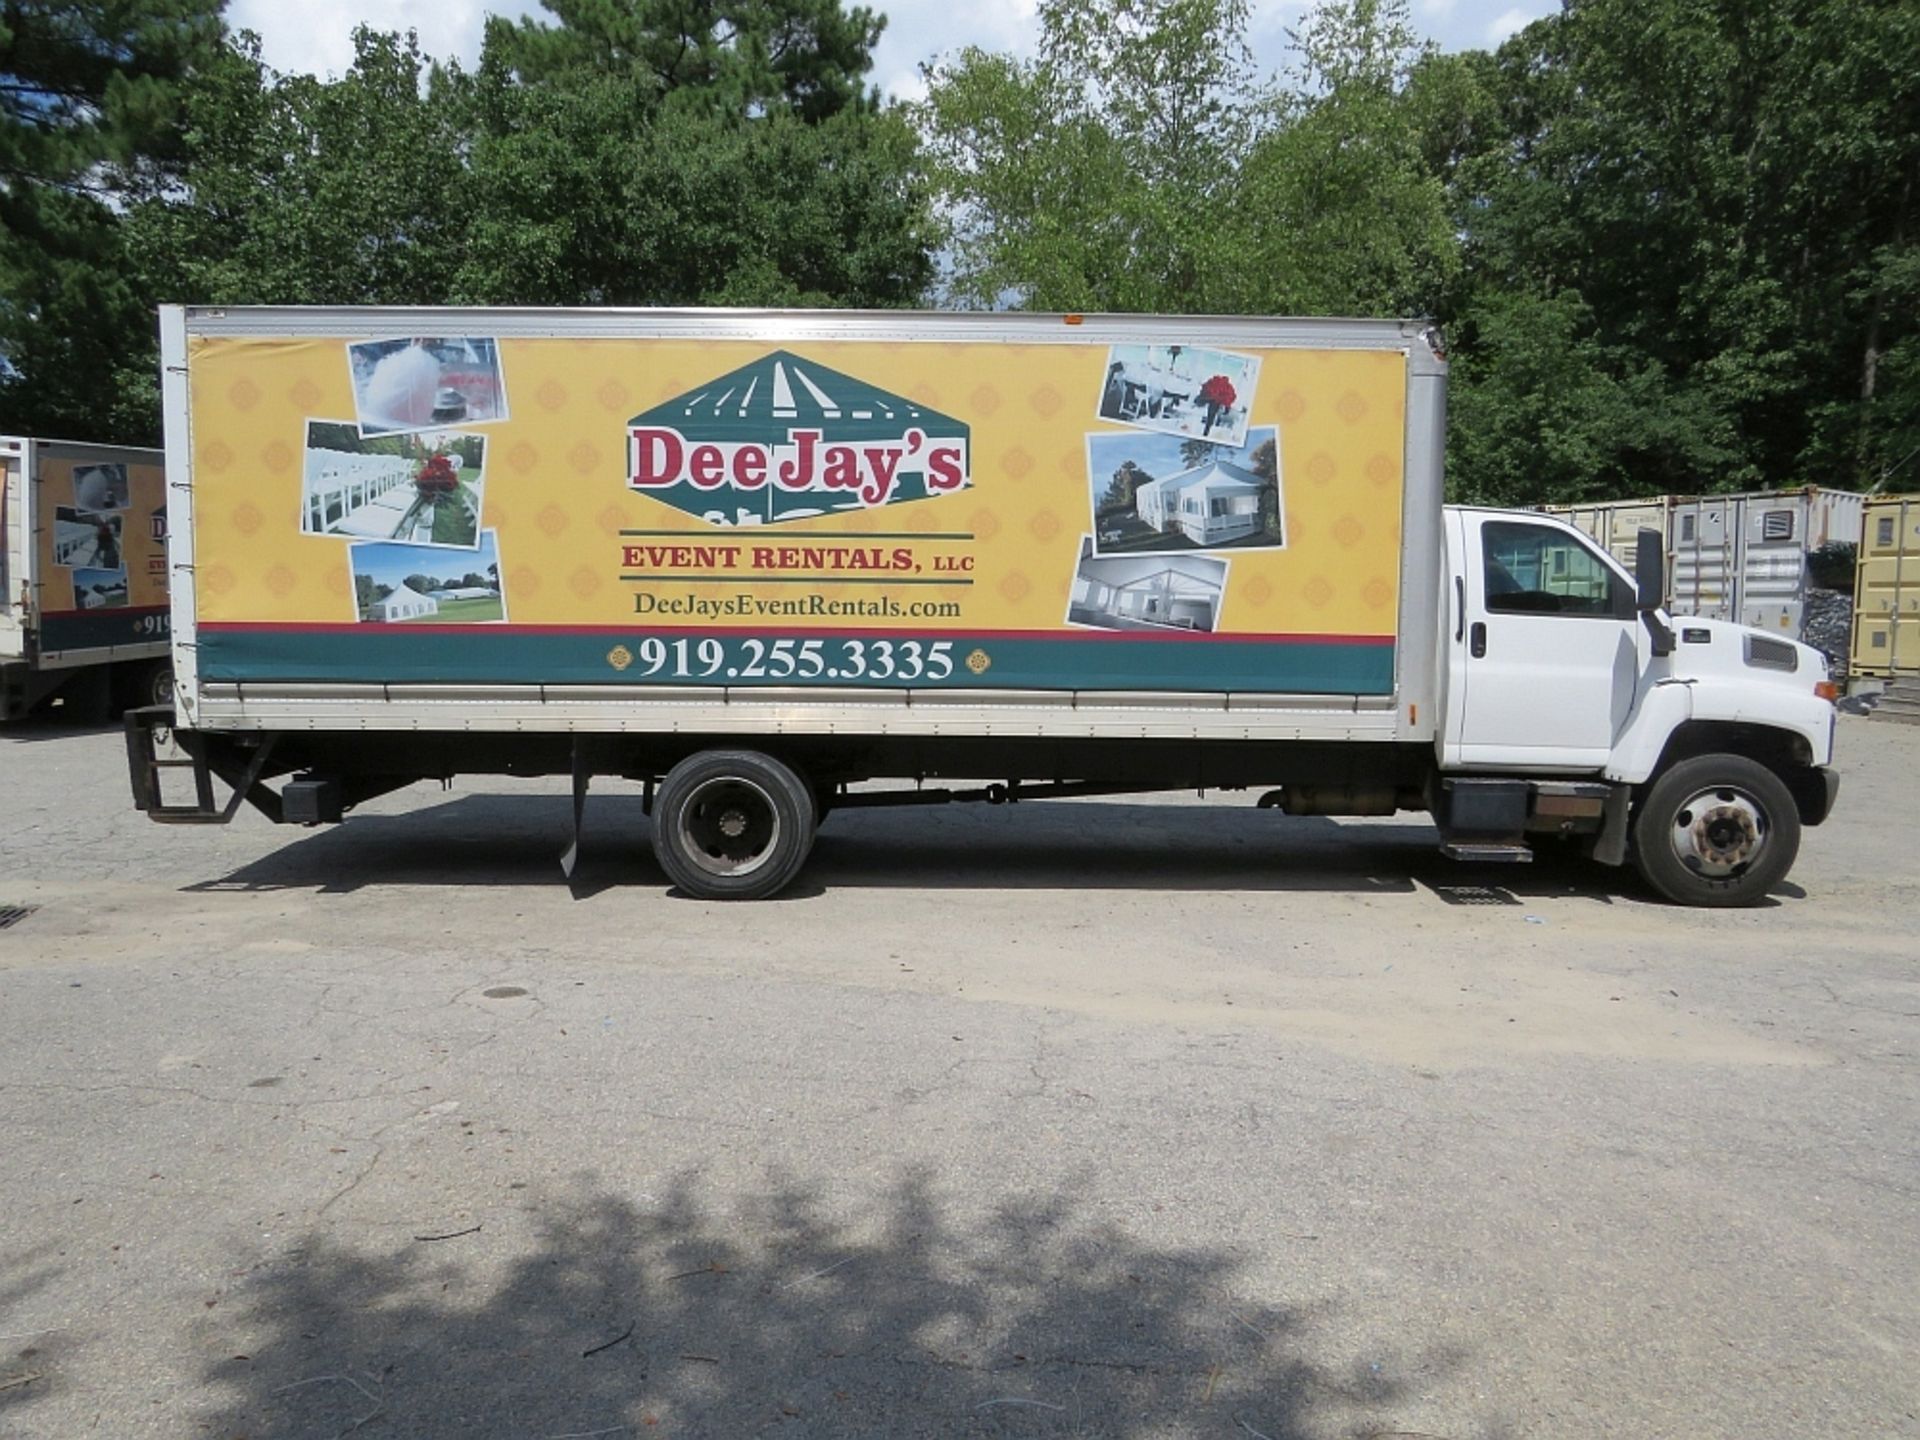 2006 Chevrolet Diesel Delivery Truck, 25,200 lb. GVWR, 24ft - Image 2 of 9